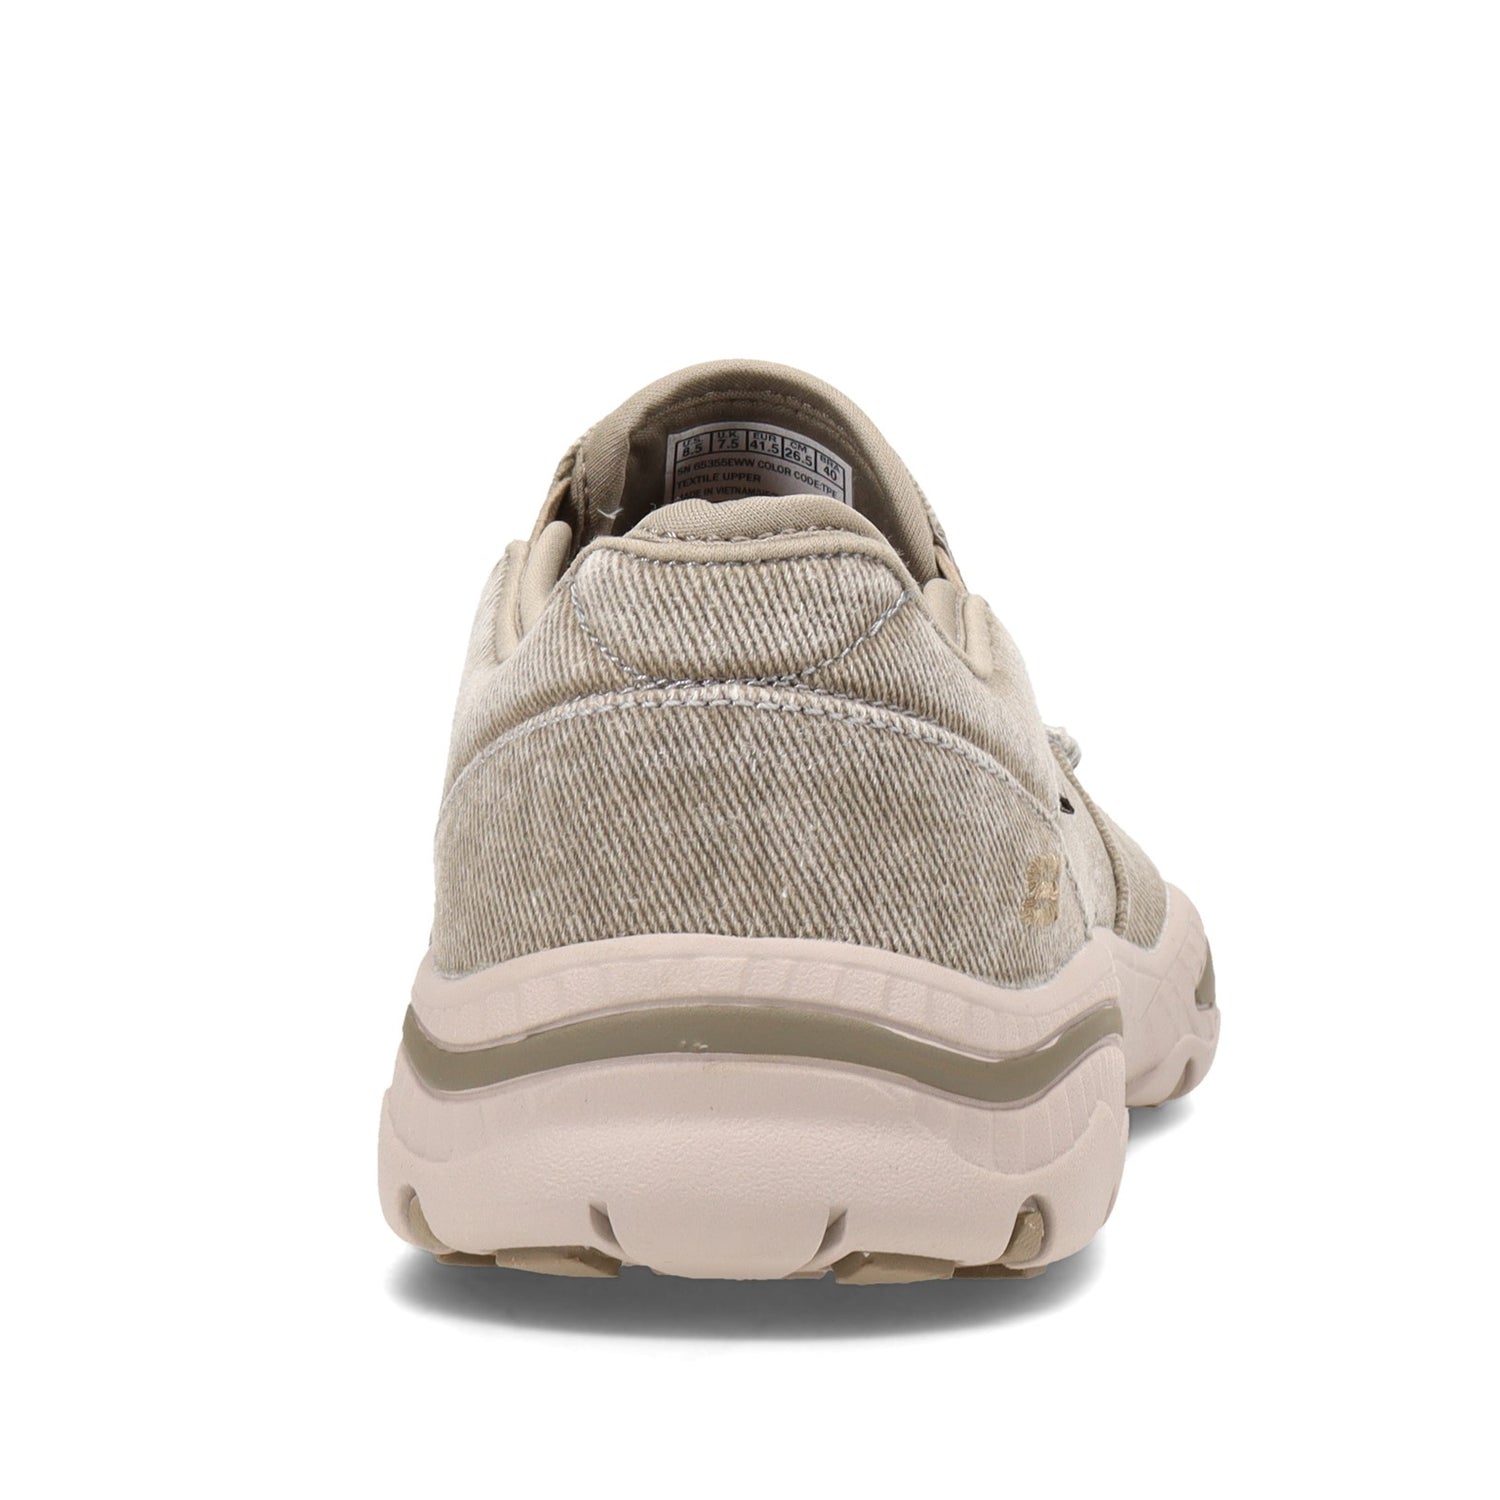 Peltz Shoes  Men's Skechers Relaxed Fit Creston Moseco Slip-On TAUPE 65355-TPE